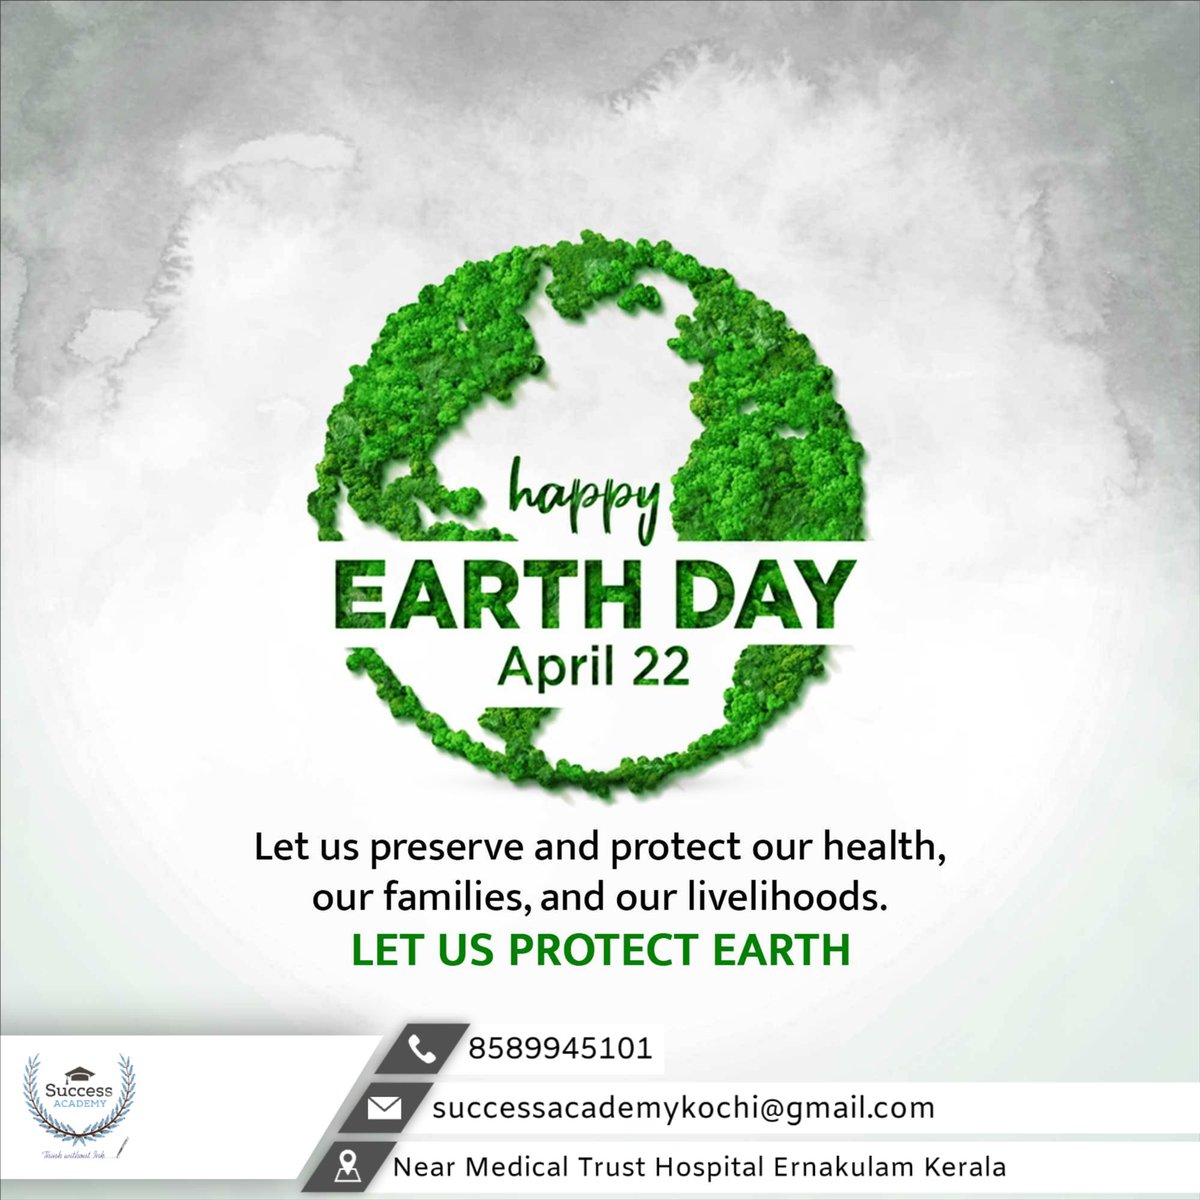 #WorldEarthDay #EarthDay2024 #ProtectOurPlanet #ClimateAction #GoGreen #SustainableLiving #MotherEarth #EcoFriendly #NatureMatters #EarthDayEveryDay #ReduceReuseRecycle
#ActOnClimate #EarthDayEvents
#EnvironmentalAwareness #SSCCoaching #BankCoaching #SuccessAcademyKochi